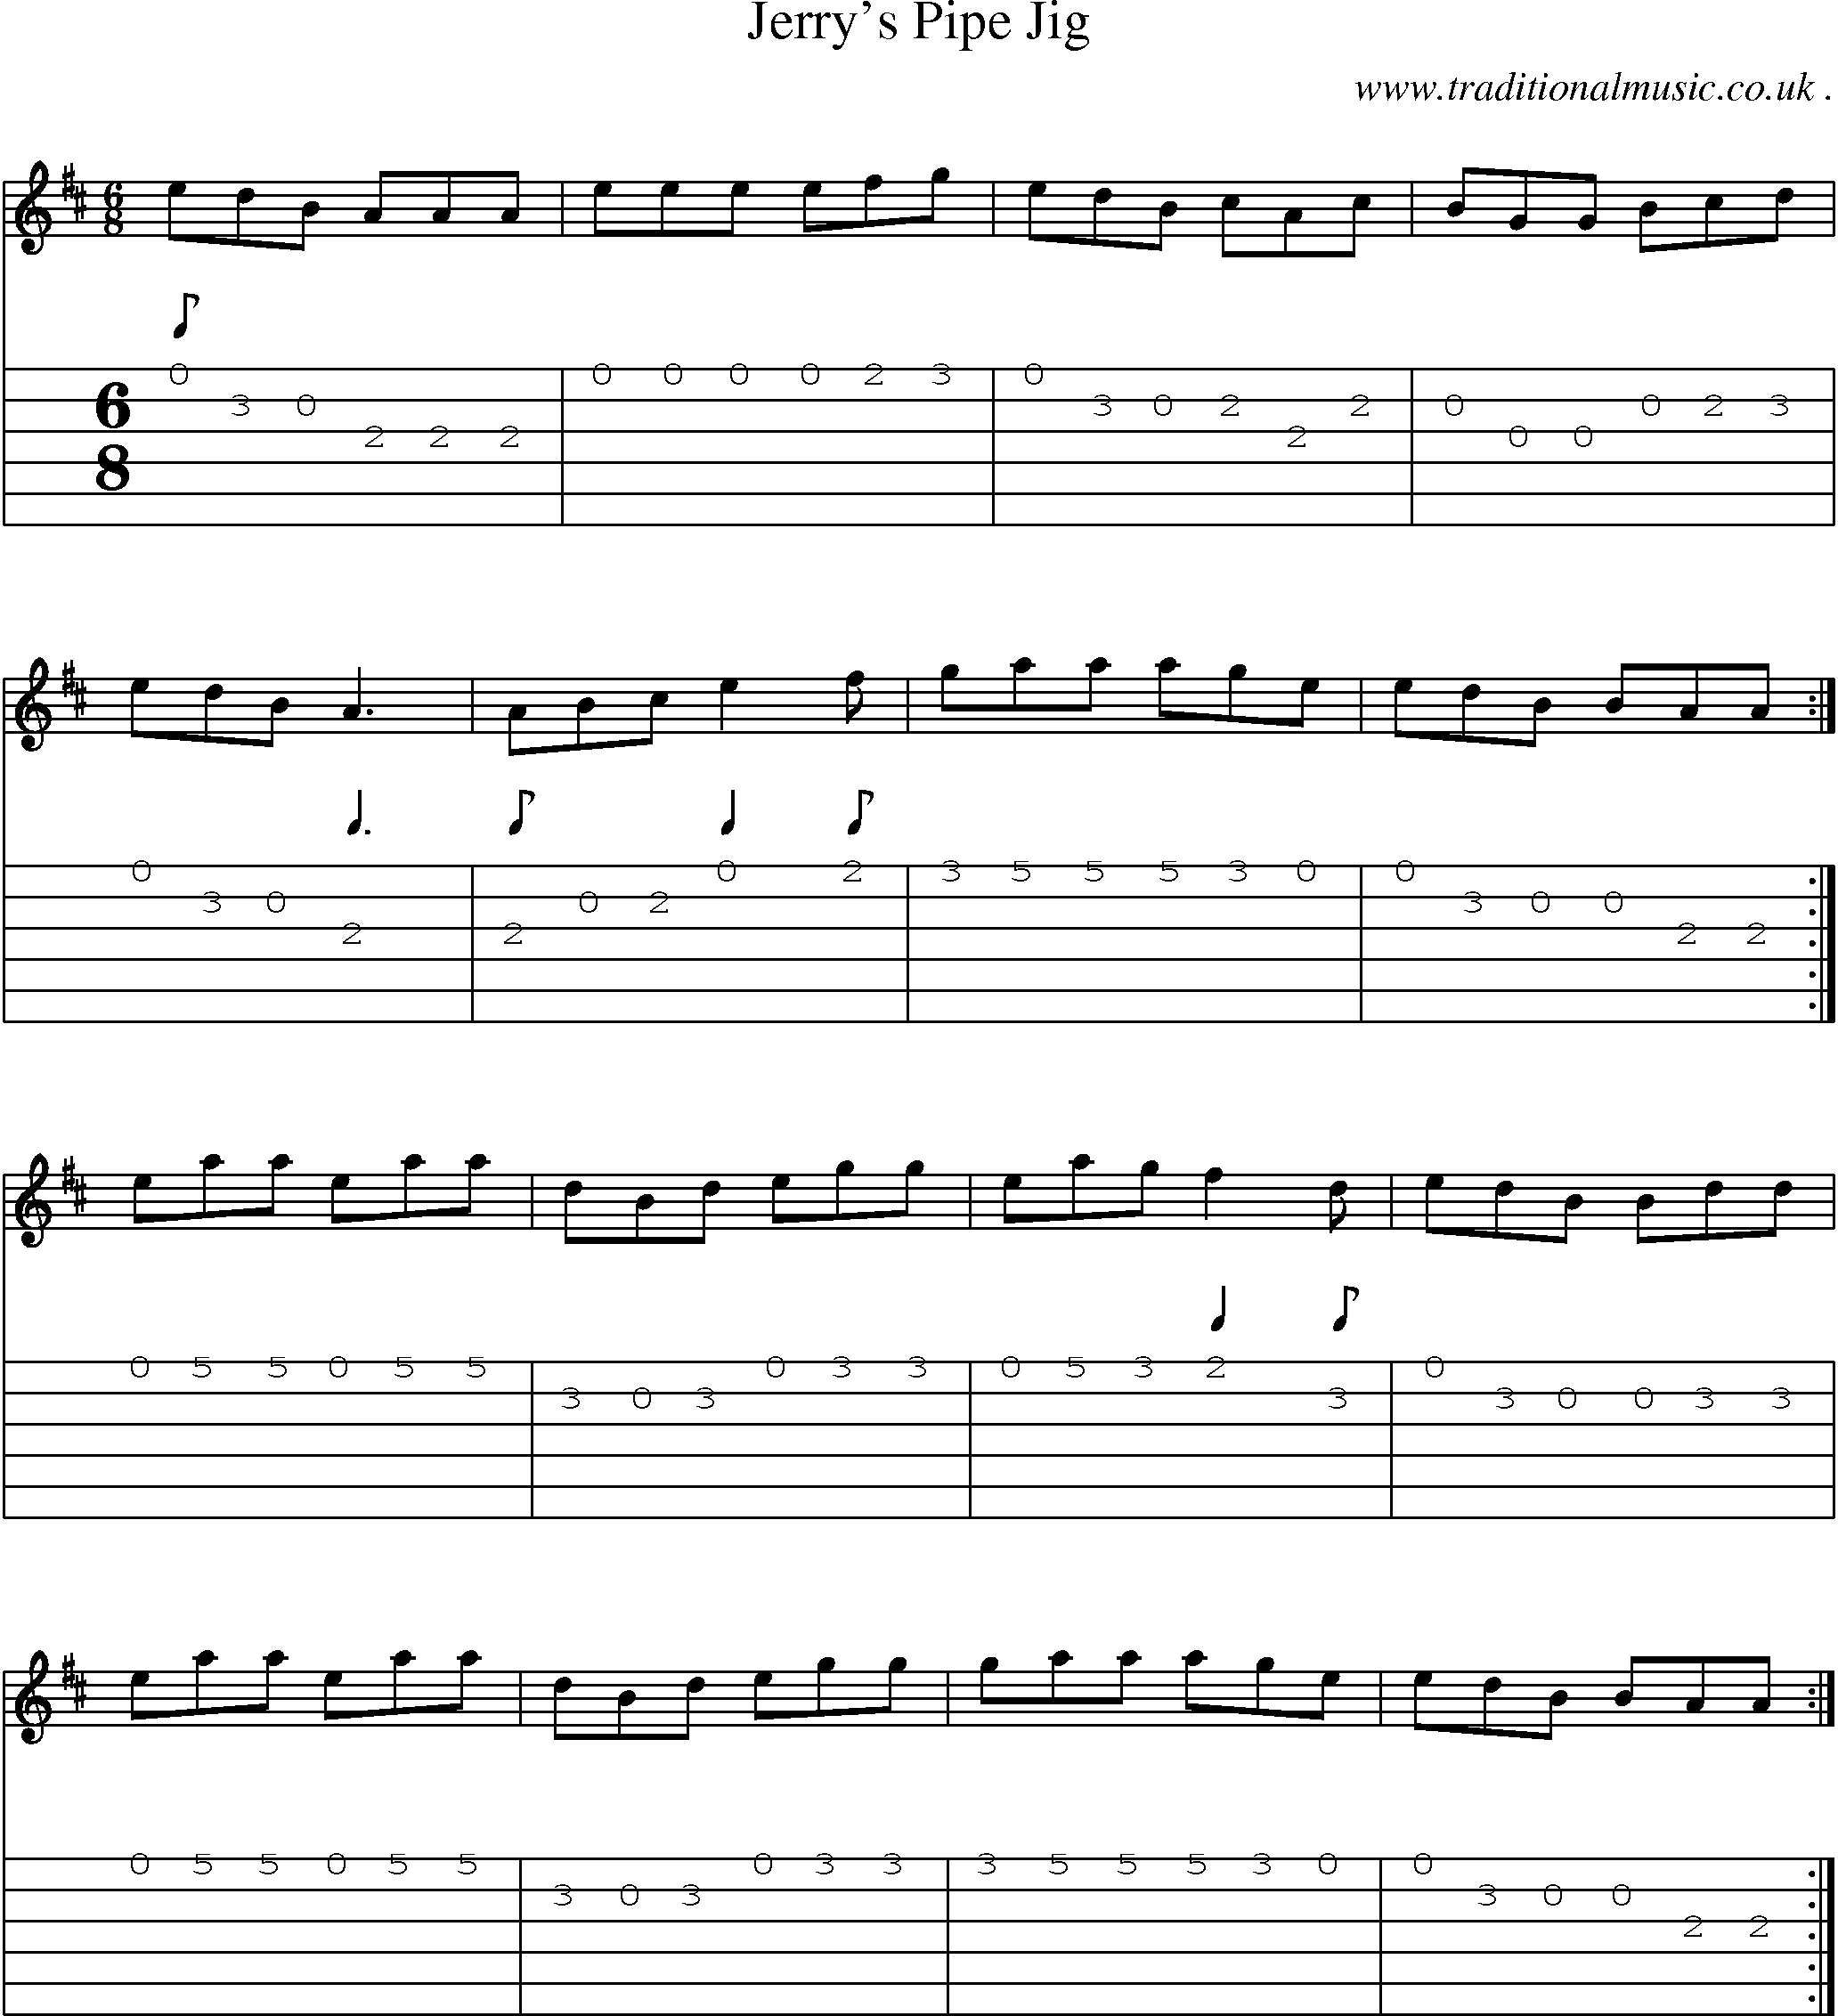 Sheet-music  score, Chords and Guitar Tabs for Jerrys Pipe Jig